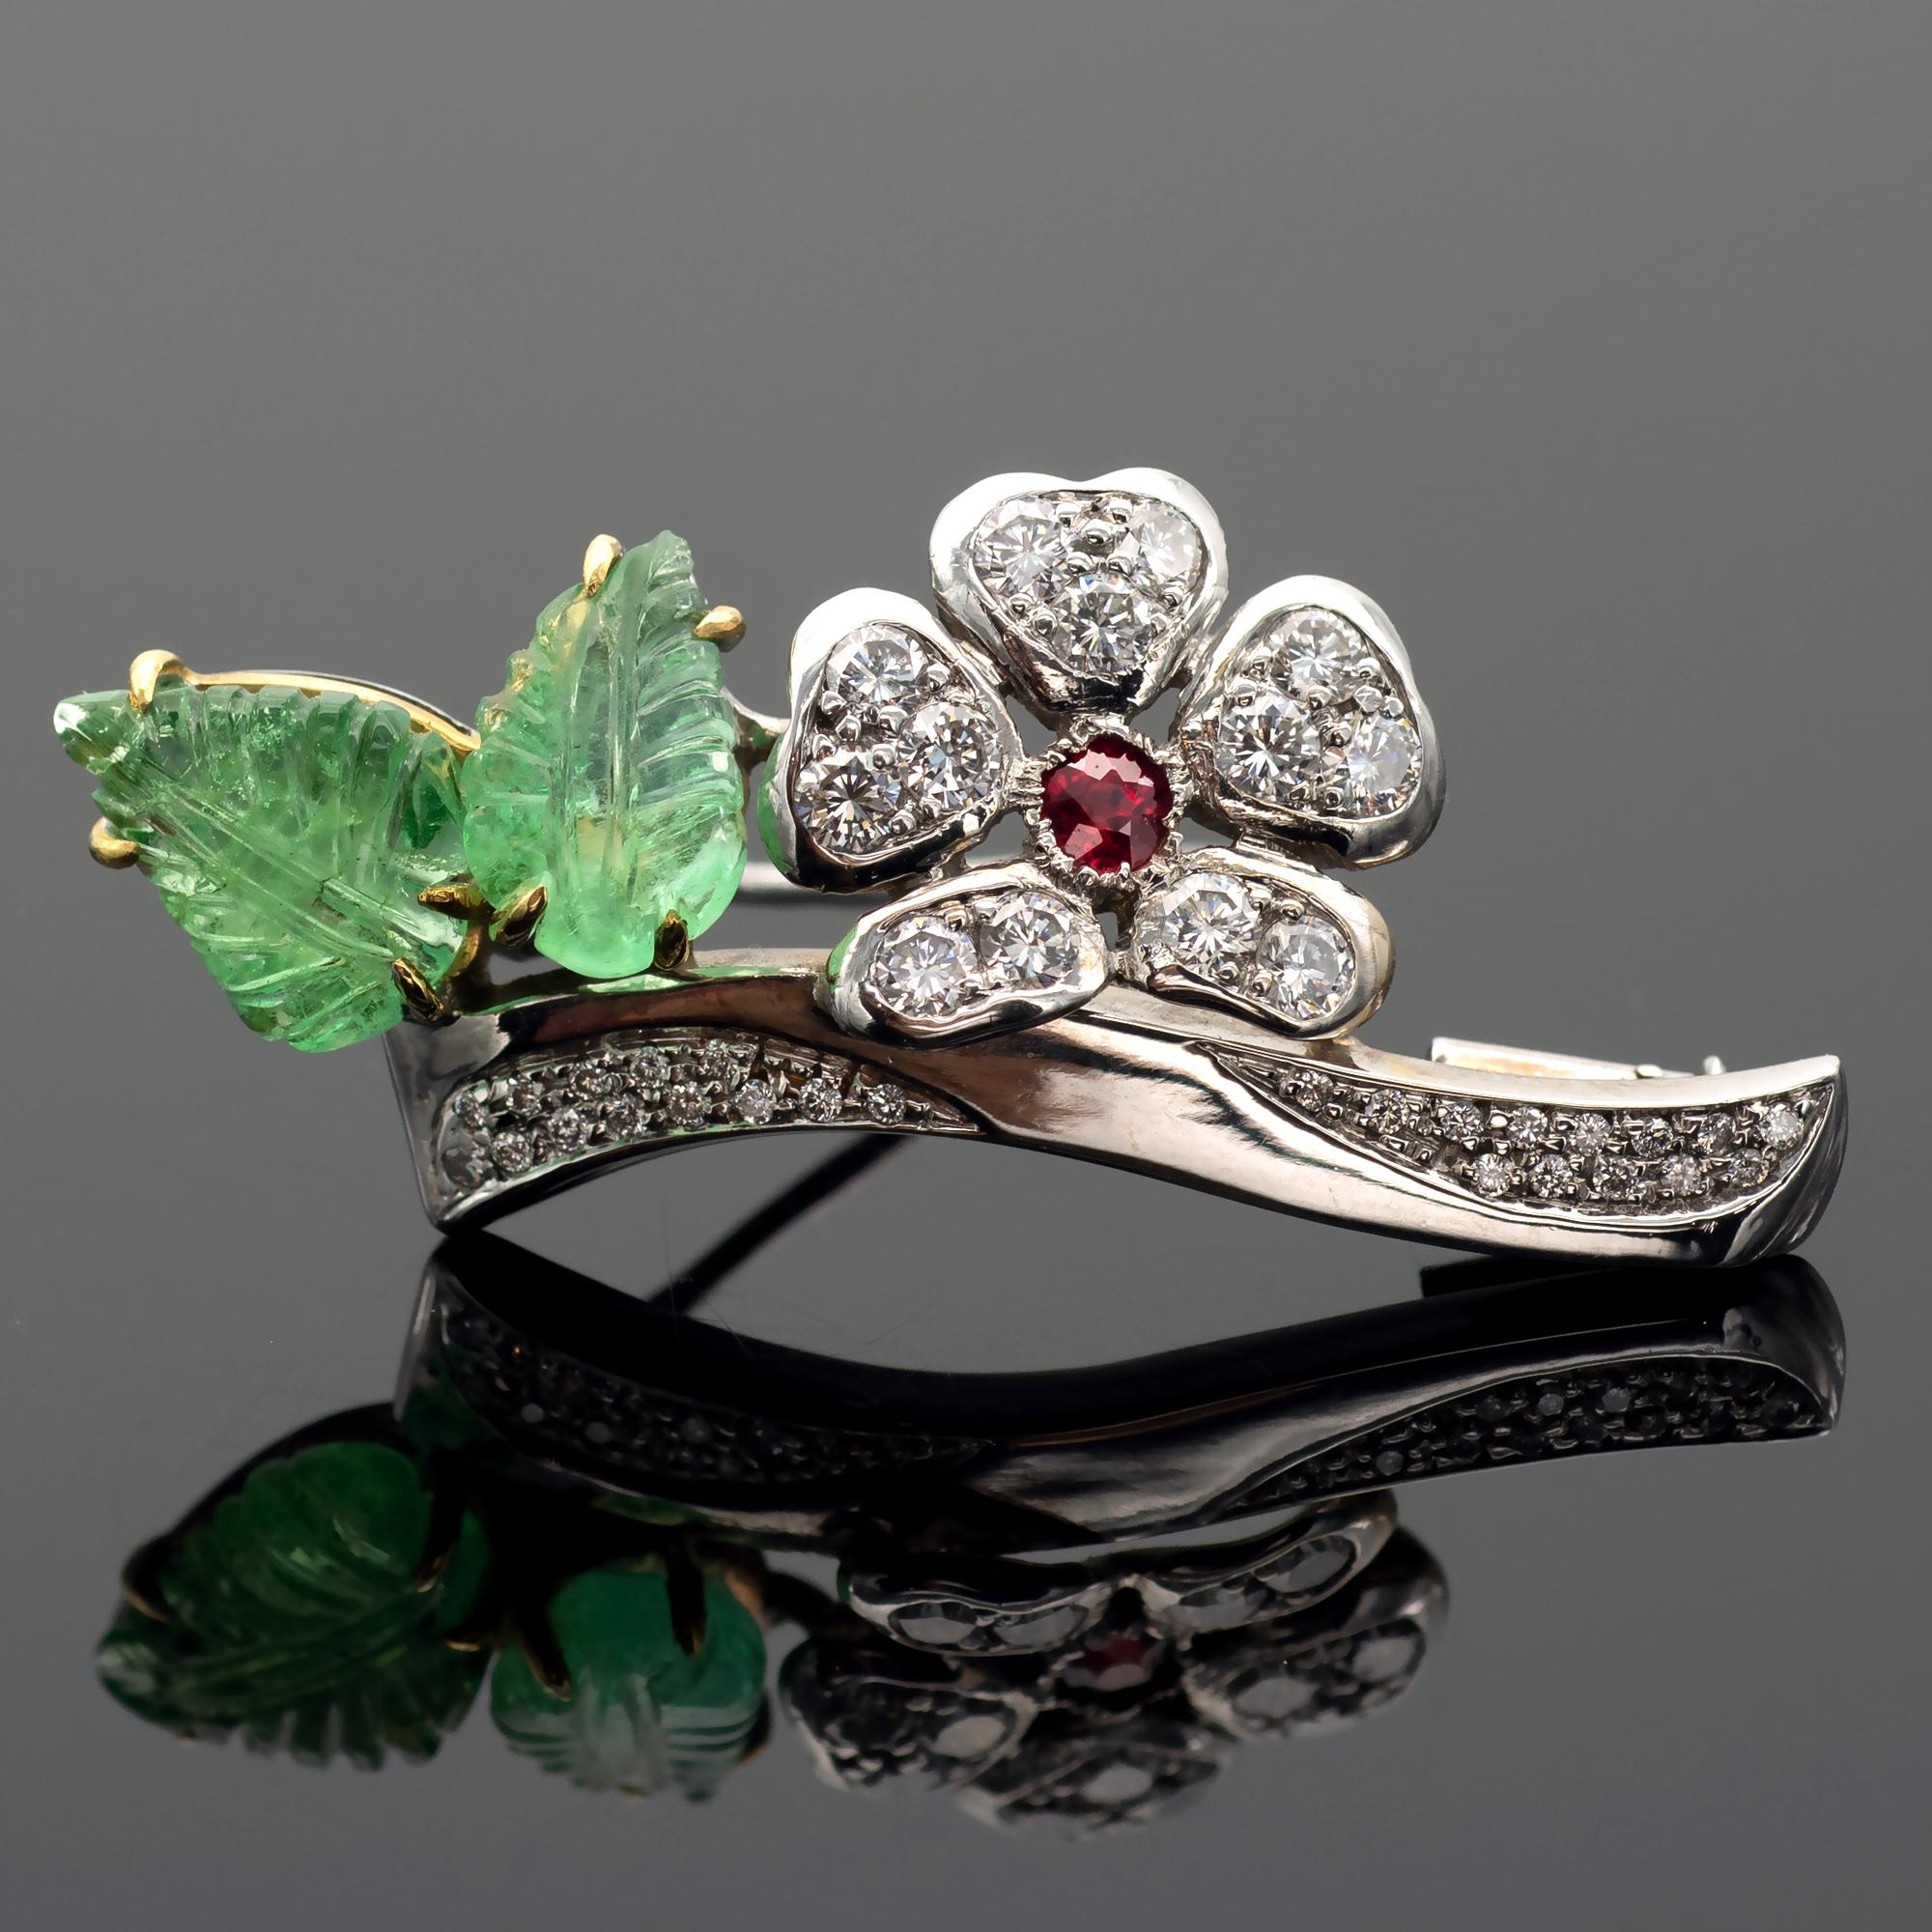 Featuring two exquisitely engraved emerald leaves and a dainty flower on a branch, this brooch exemplifies the stunning beauty of nature. The intricate design is complemented by the shimmering diamonds that surround the leaves and flower, adding a